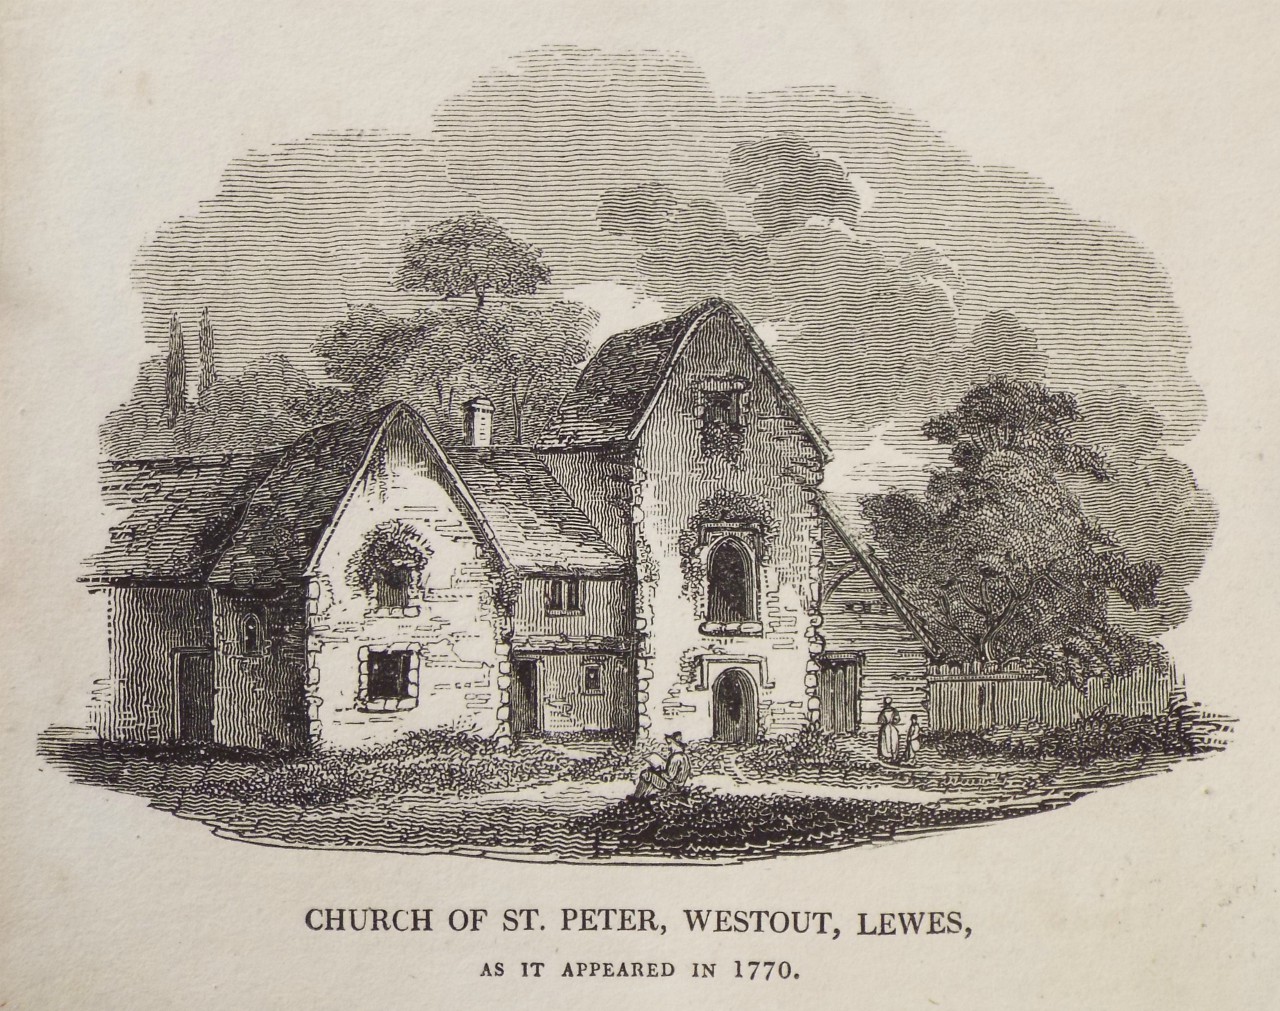 Wood - Church of St. Peter, Westout, Lewes, as it appeared in 1770.